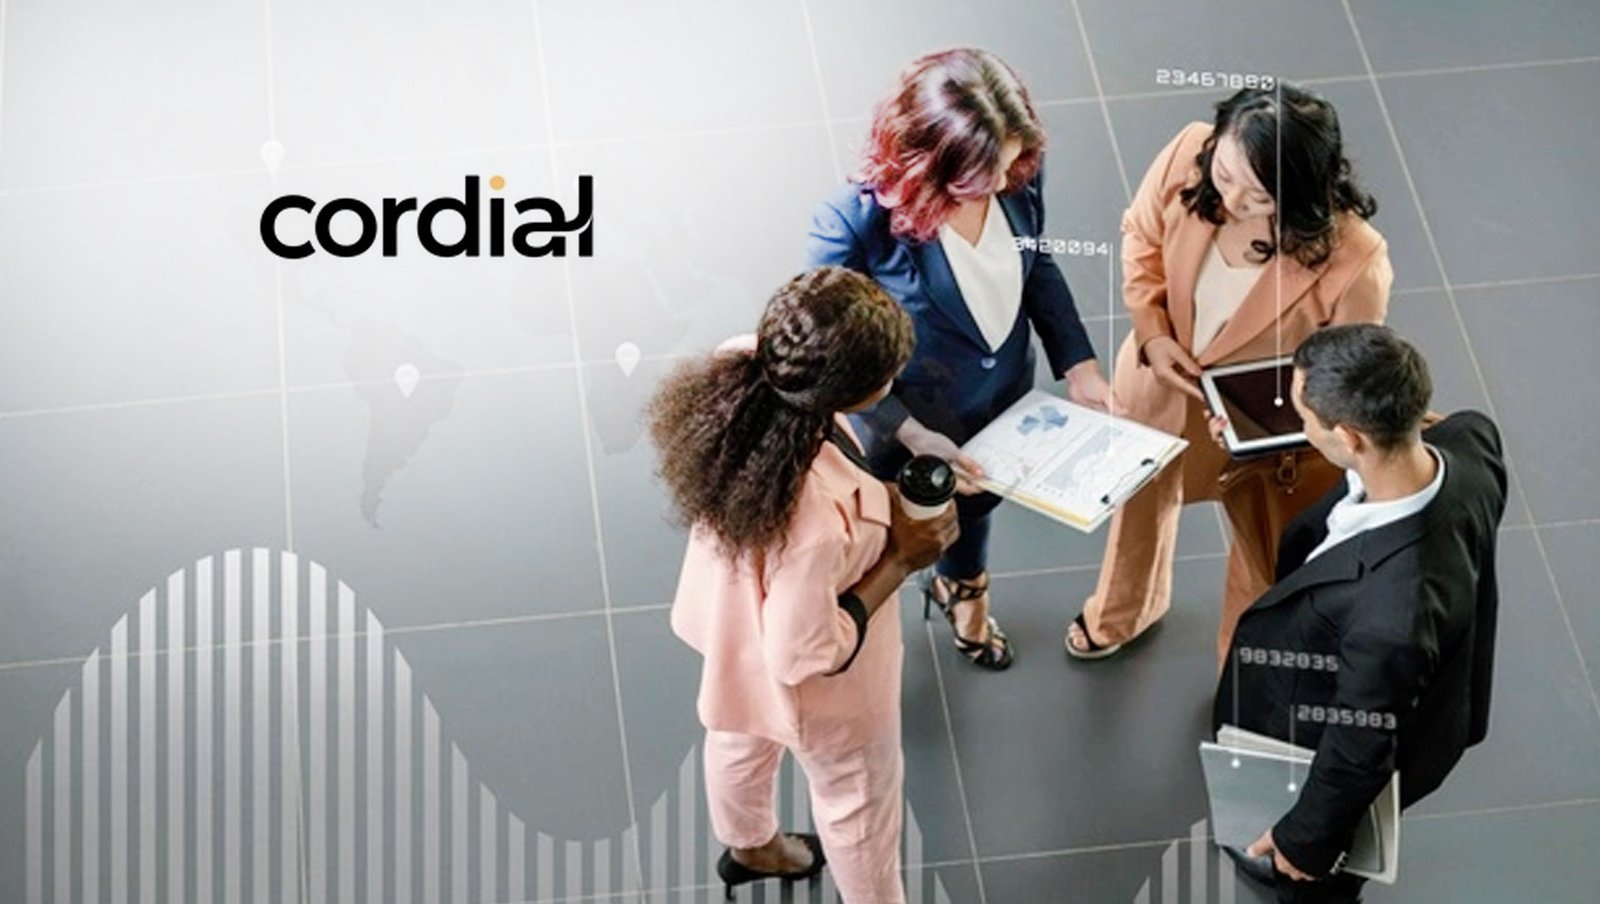 Cordial Releases Major Updates to Data Platform for Cross-Channel Marketing